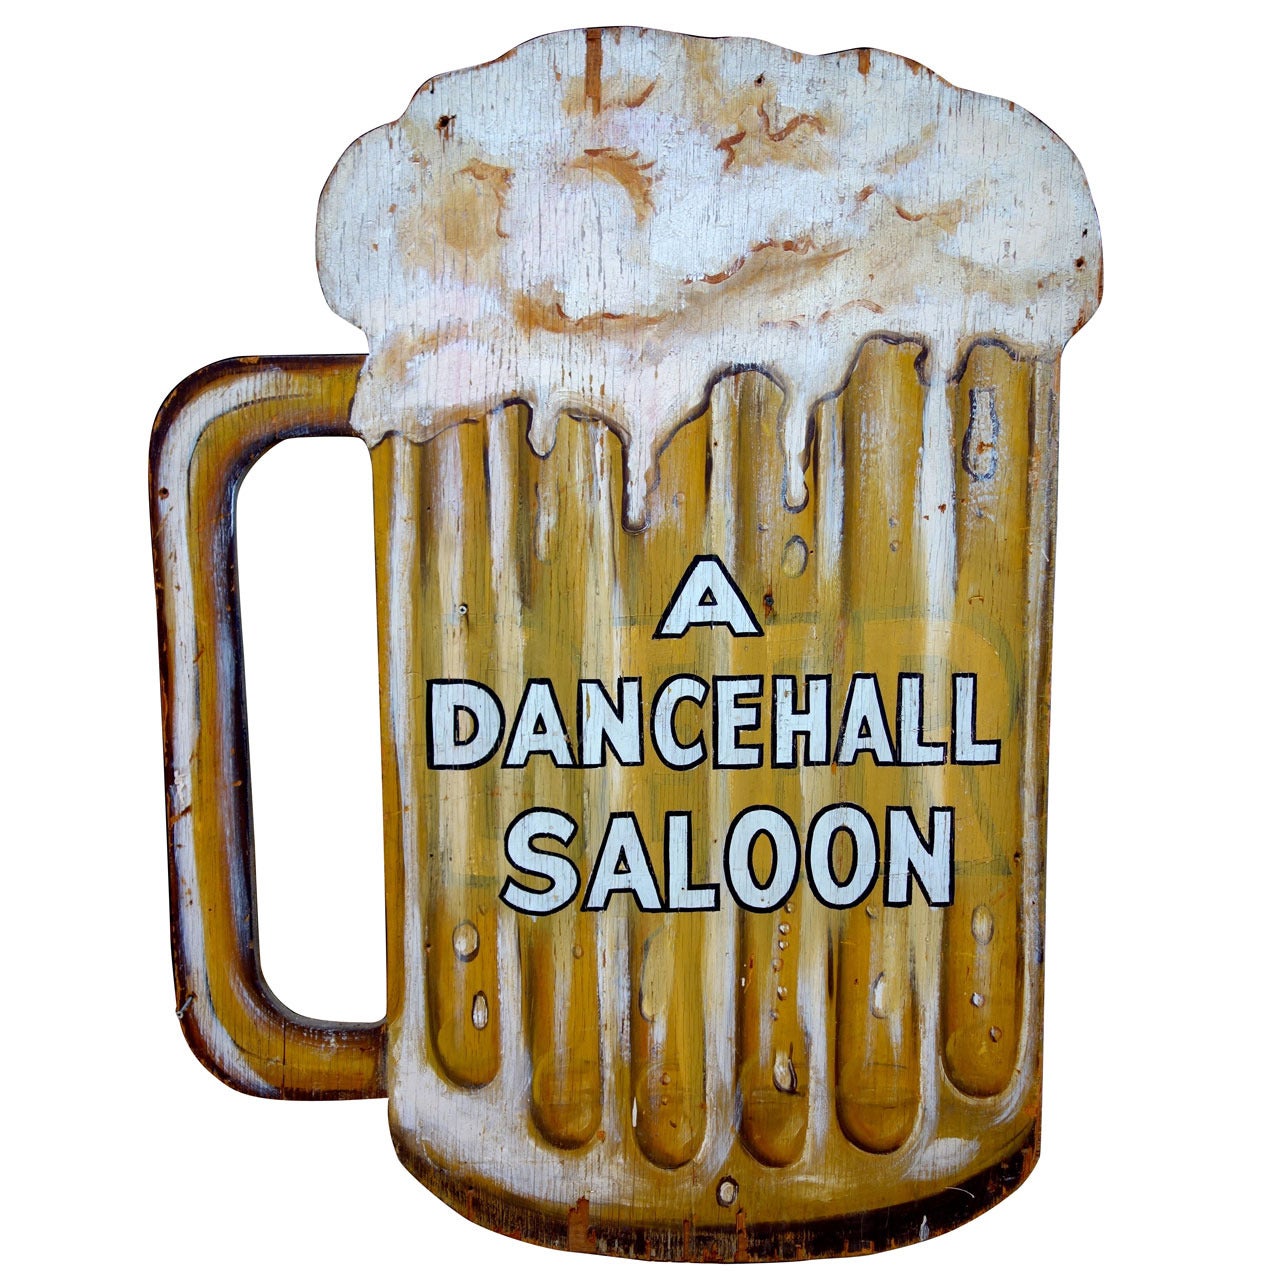 Giant Dance Hall Saloon Sign For Sale